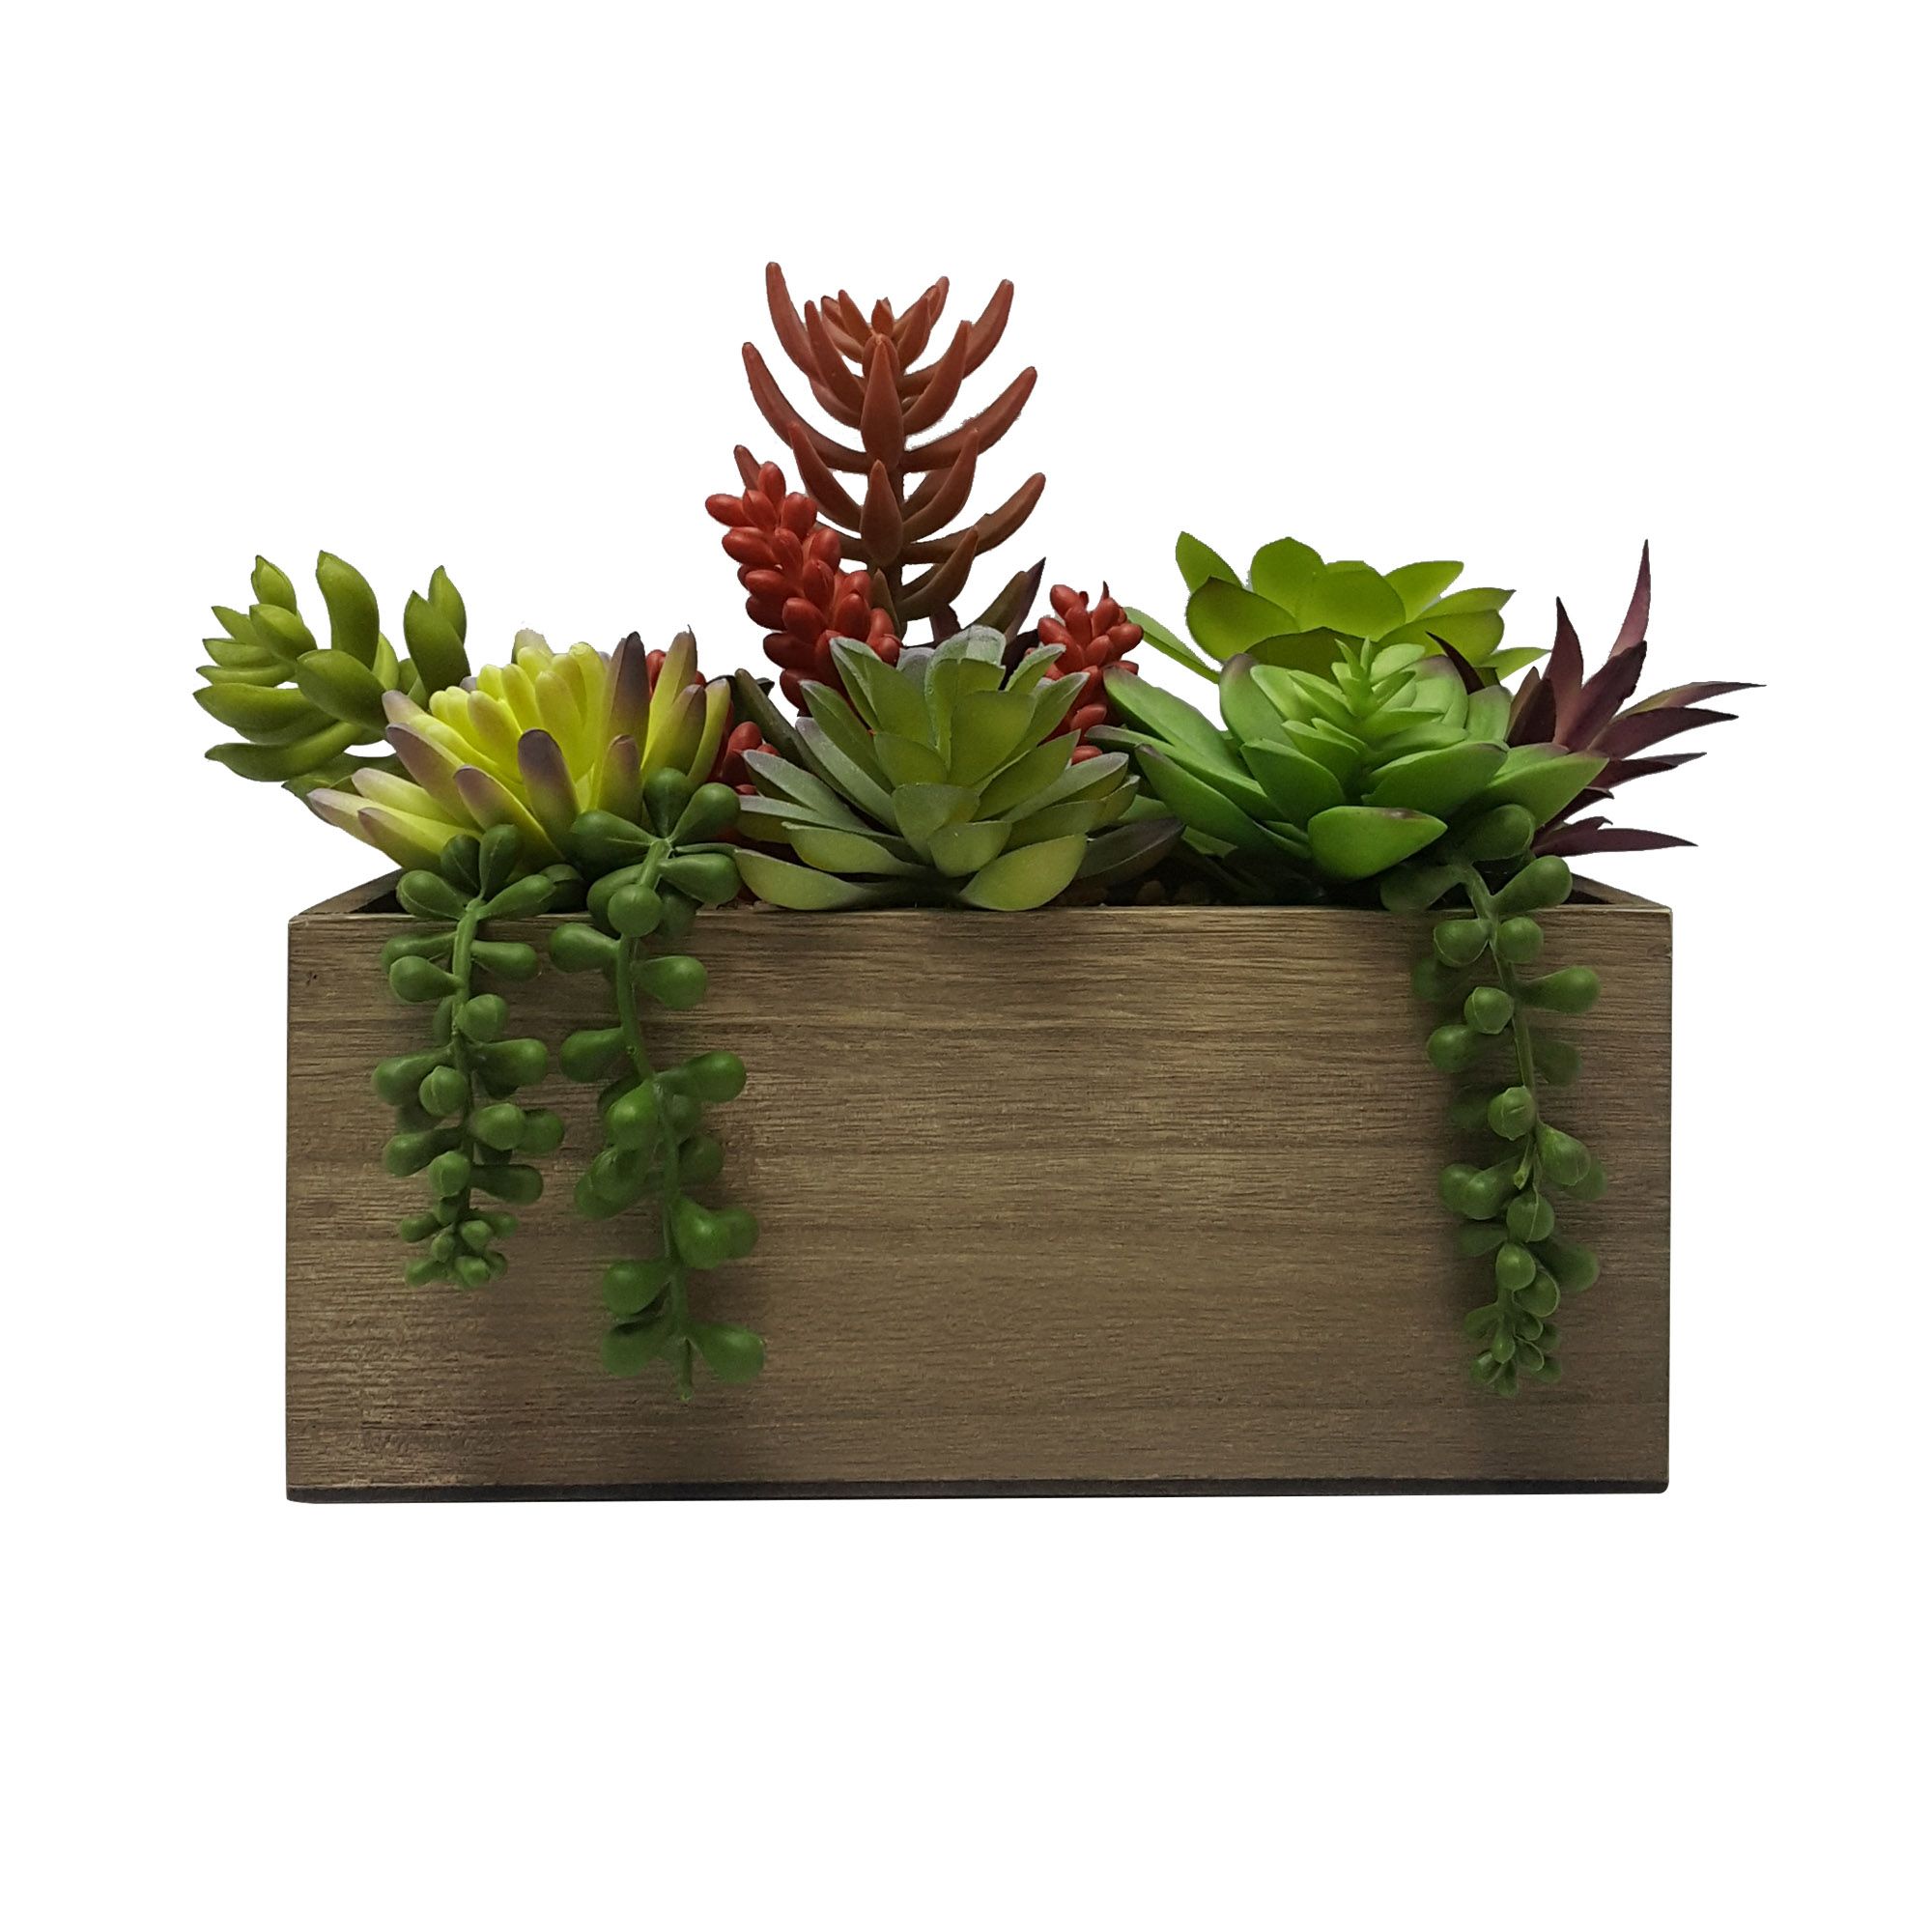 Better Homes & Gardens 7.5" Artificial Mixed Succulent Plants in Brown Wood Box - image 1 of 7